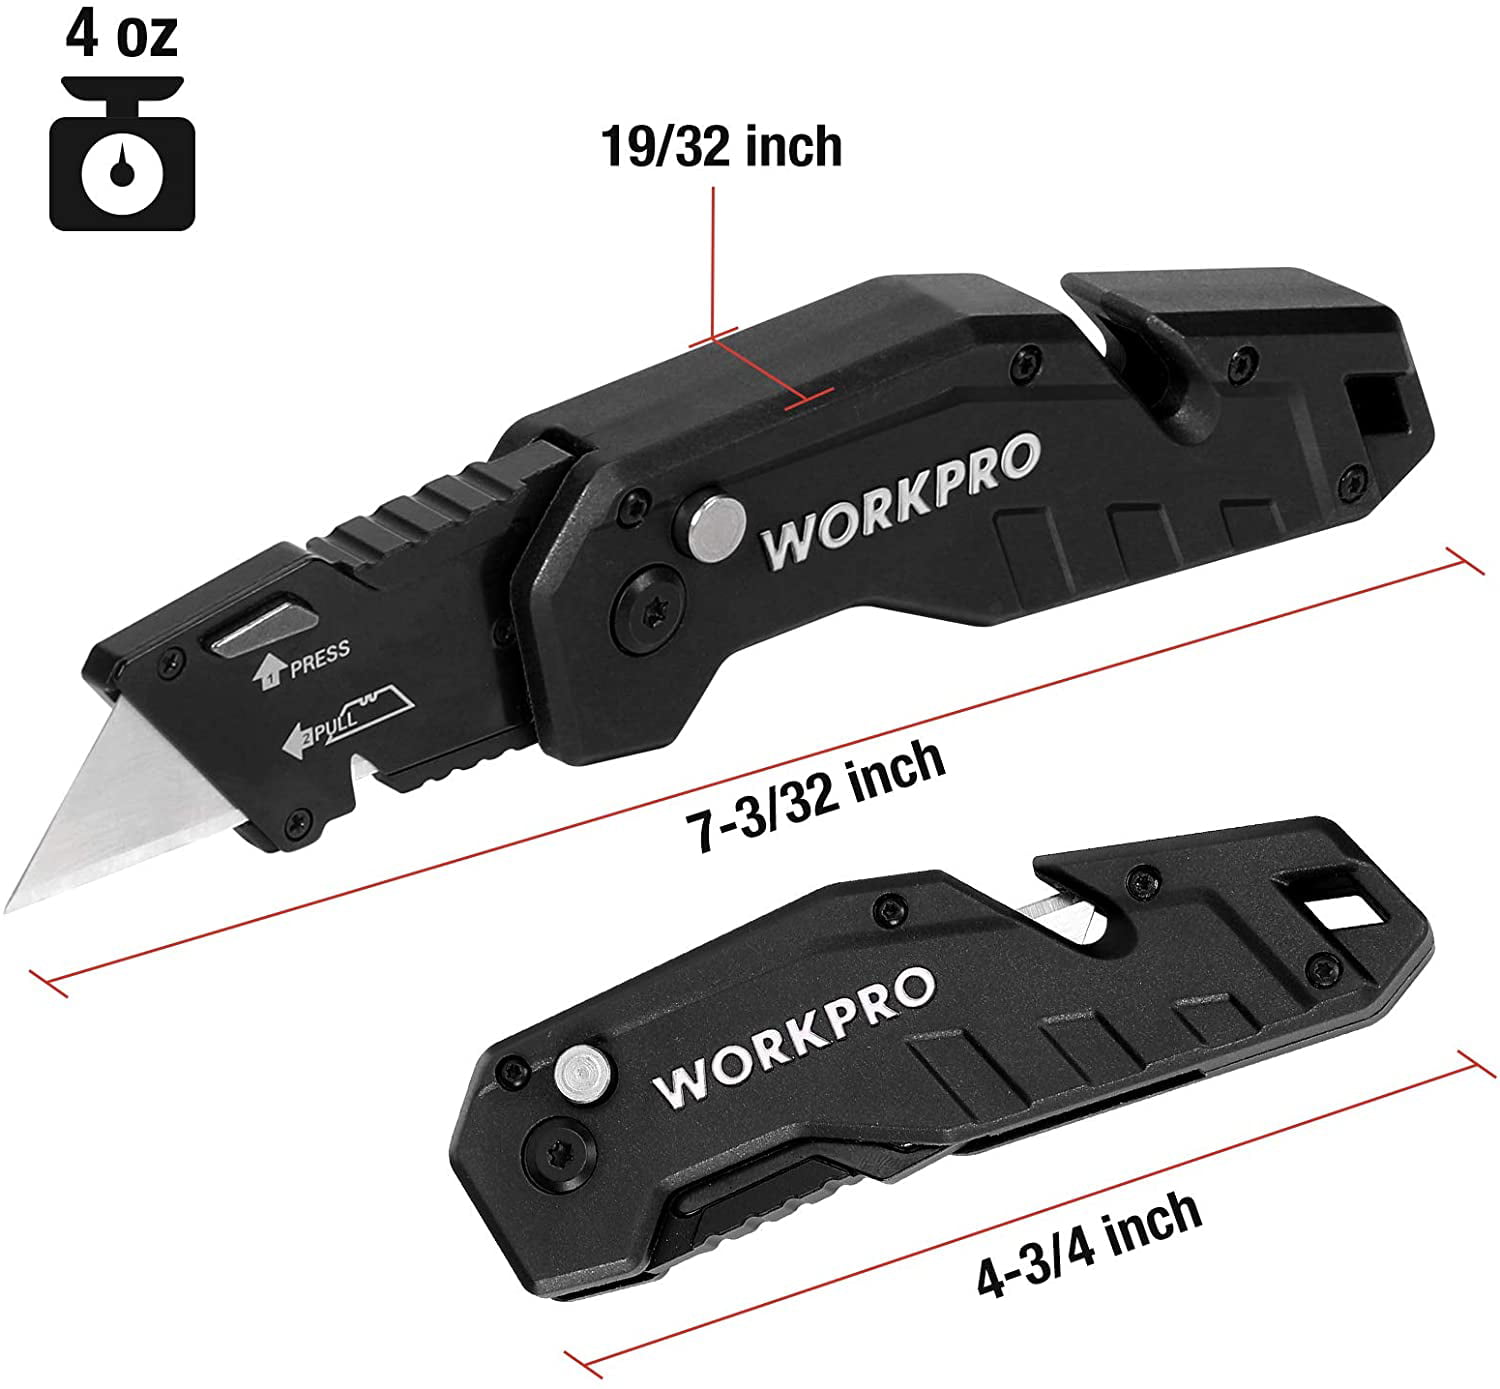 Zoid 3-in-1 Foldable Utility Knife with Contoured Body and Trax-Grip for  Safe and Quick Cutting, Functions as a Folding Utility Knife, Wire  Stripper, and Pocket Clip, Box Cutter, Cardboard Cutter - Yahoo